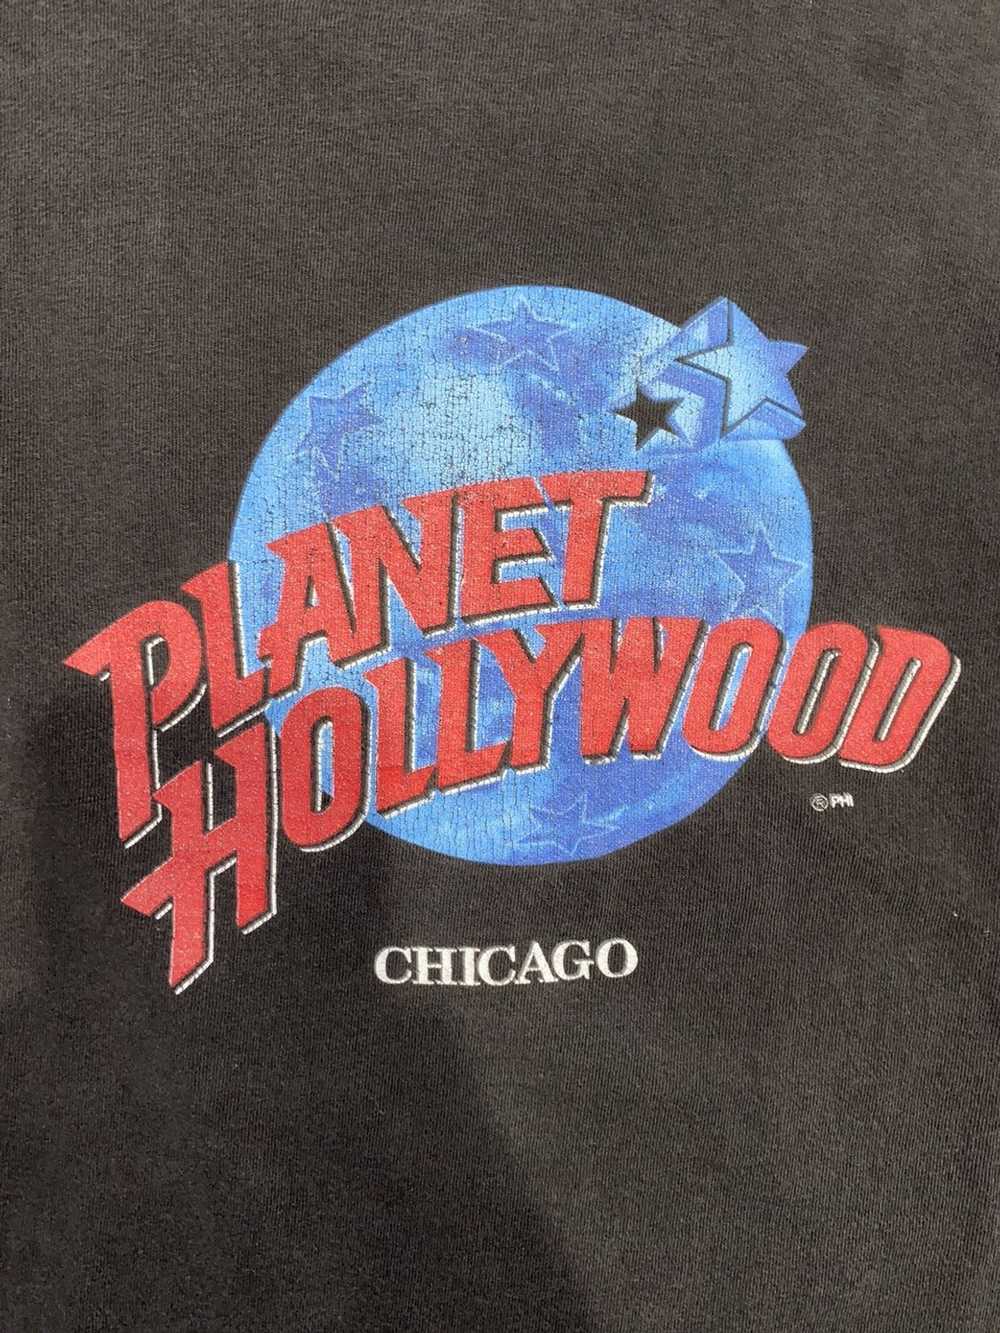 Planet Hollywood × Vintage Planet Hollywood Chica… - image 2